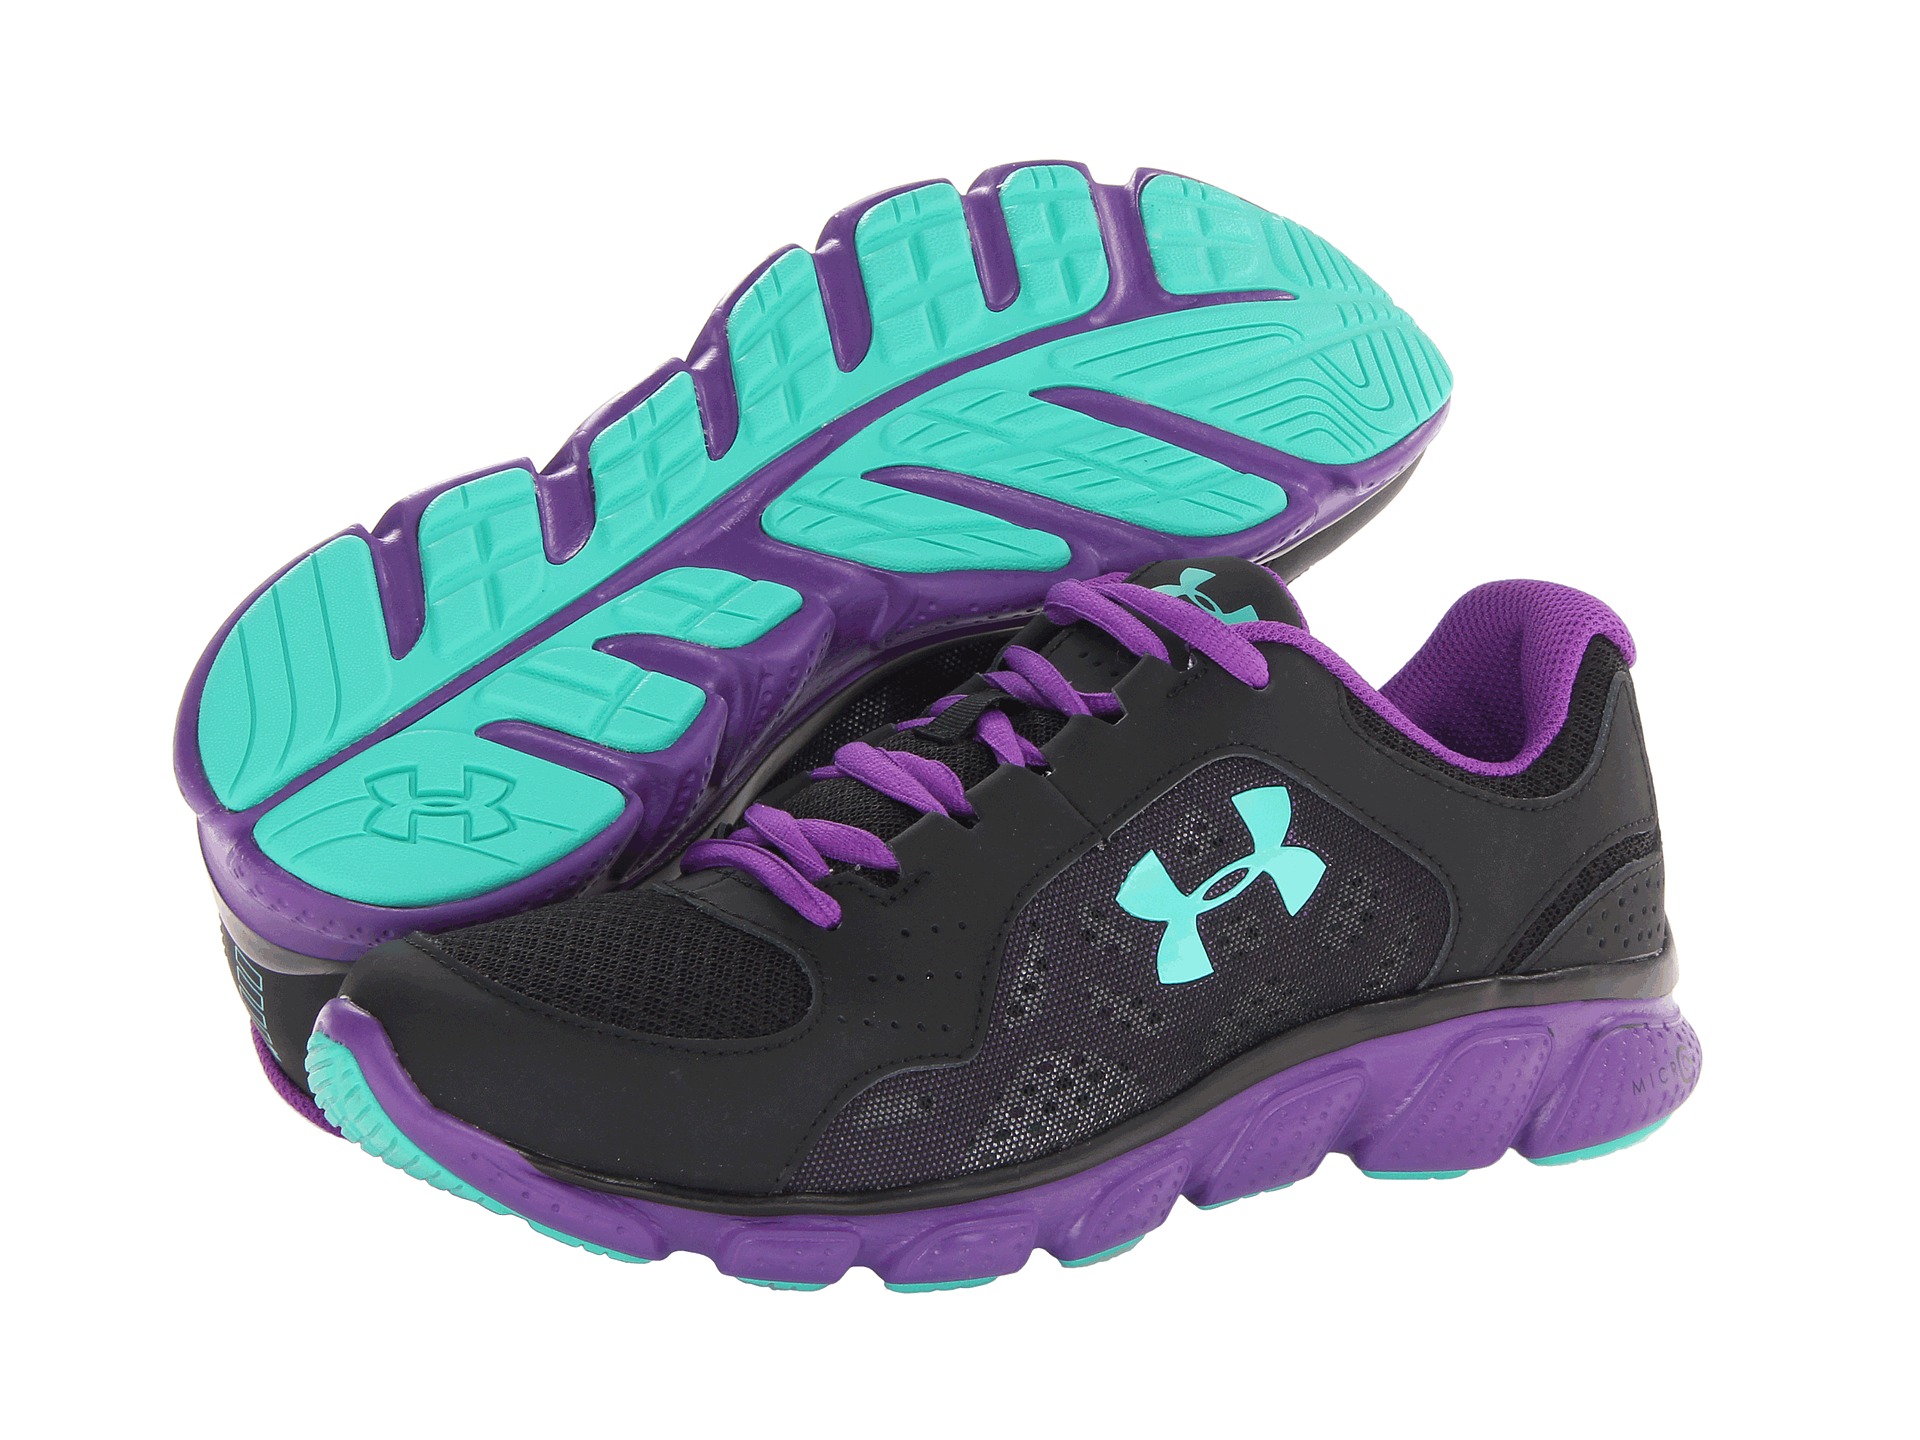 Under Armour Ua Assert Iv Black Tone Teal Pride | Shipped Free at ...